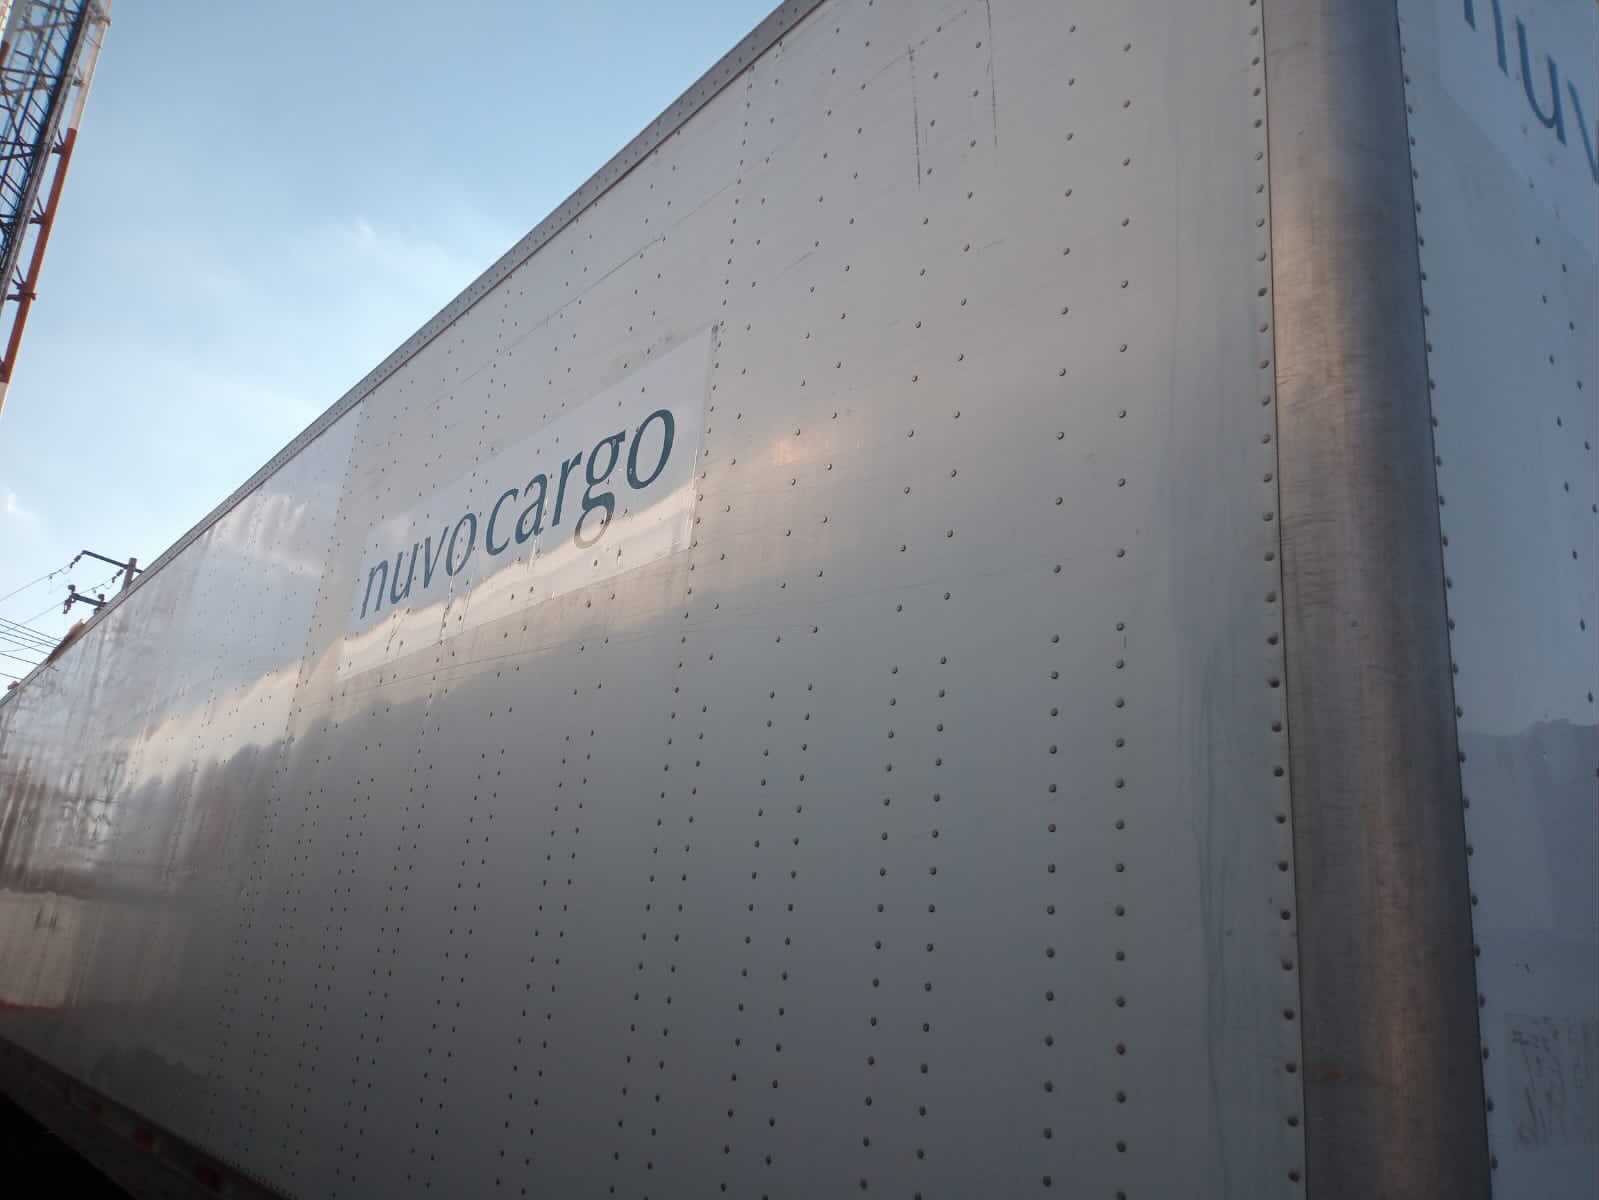 Nuvocargo raises $20.5M at a $180M valuation to bolster trade between the US and Mexico